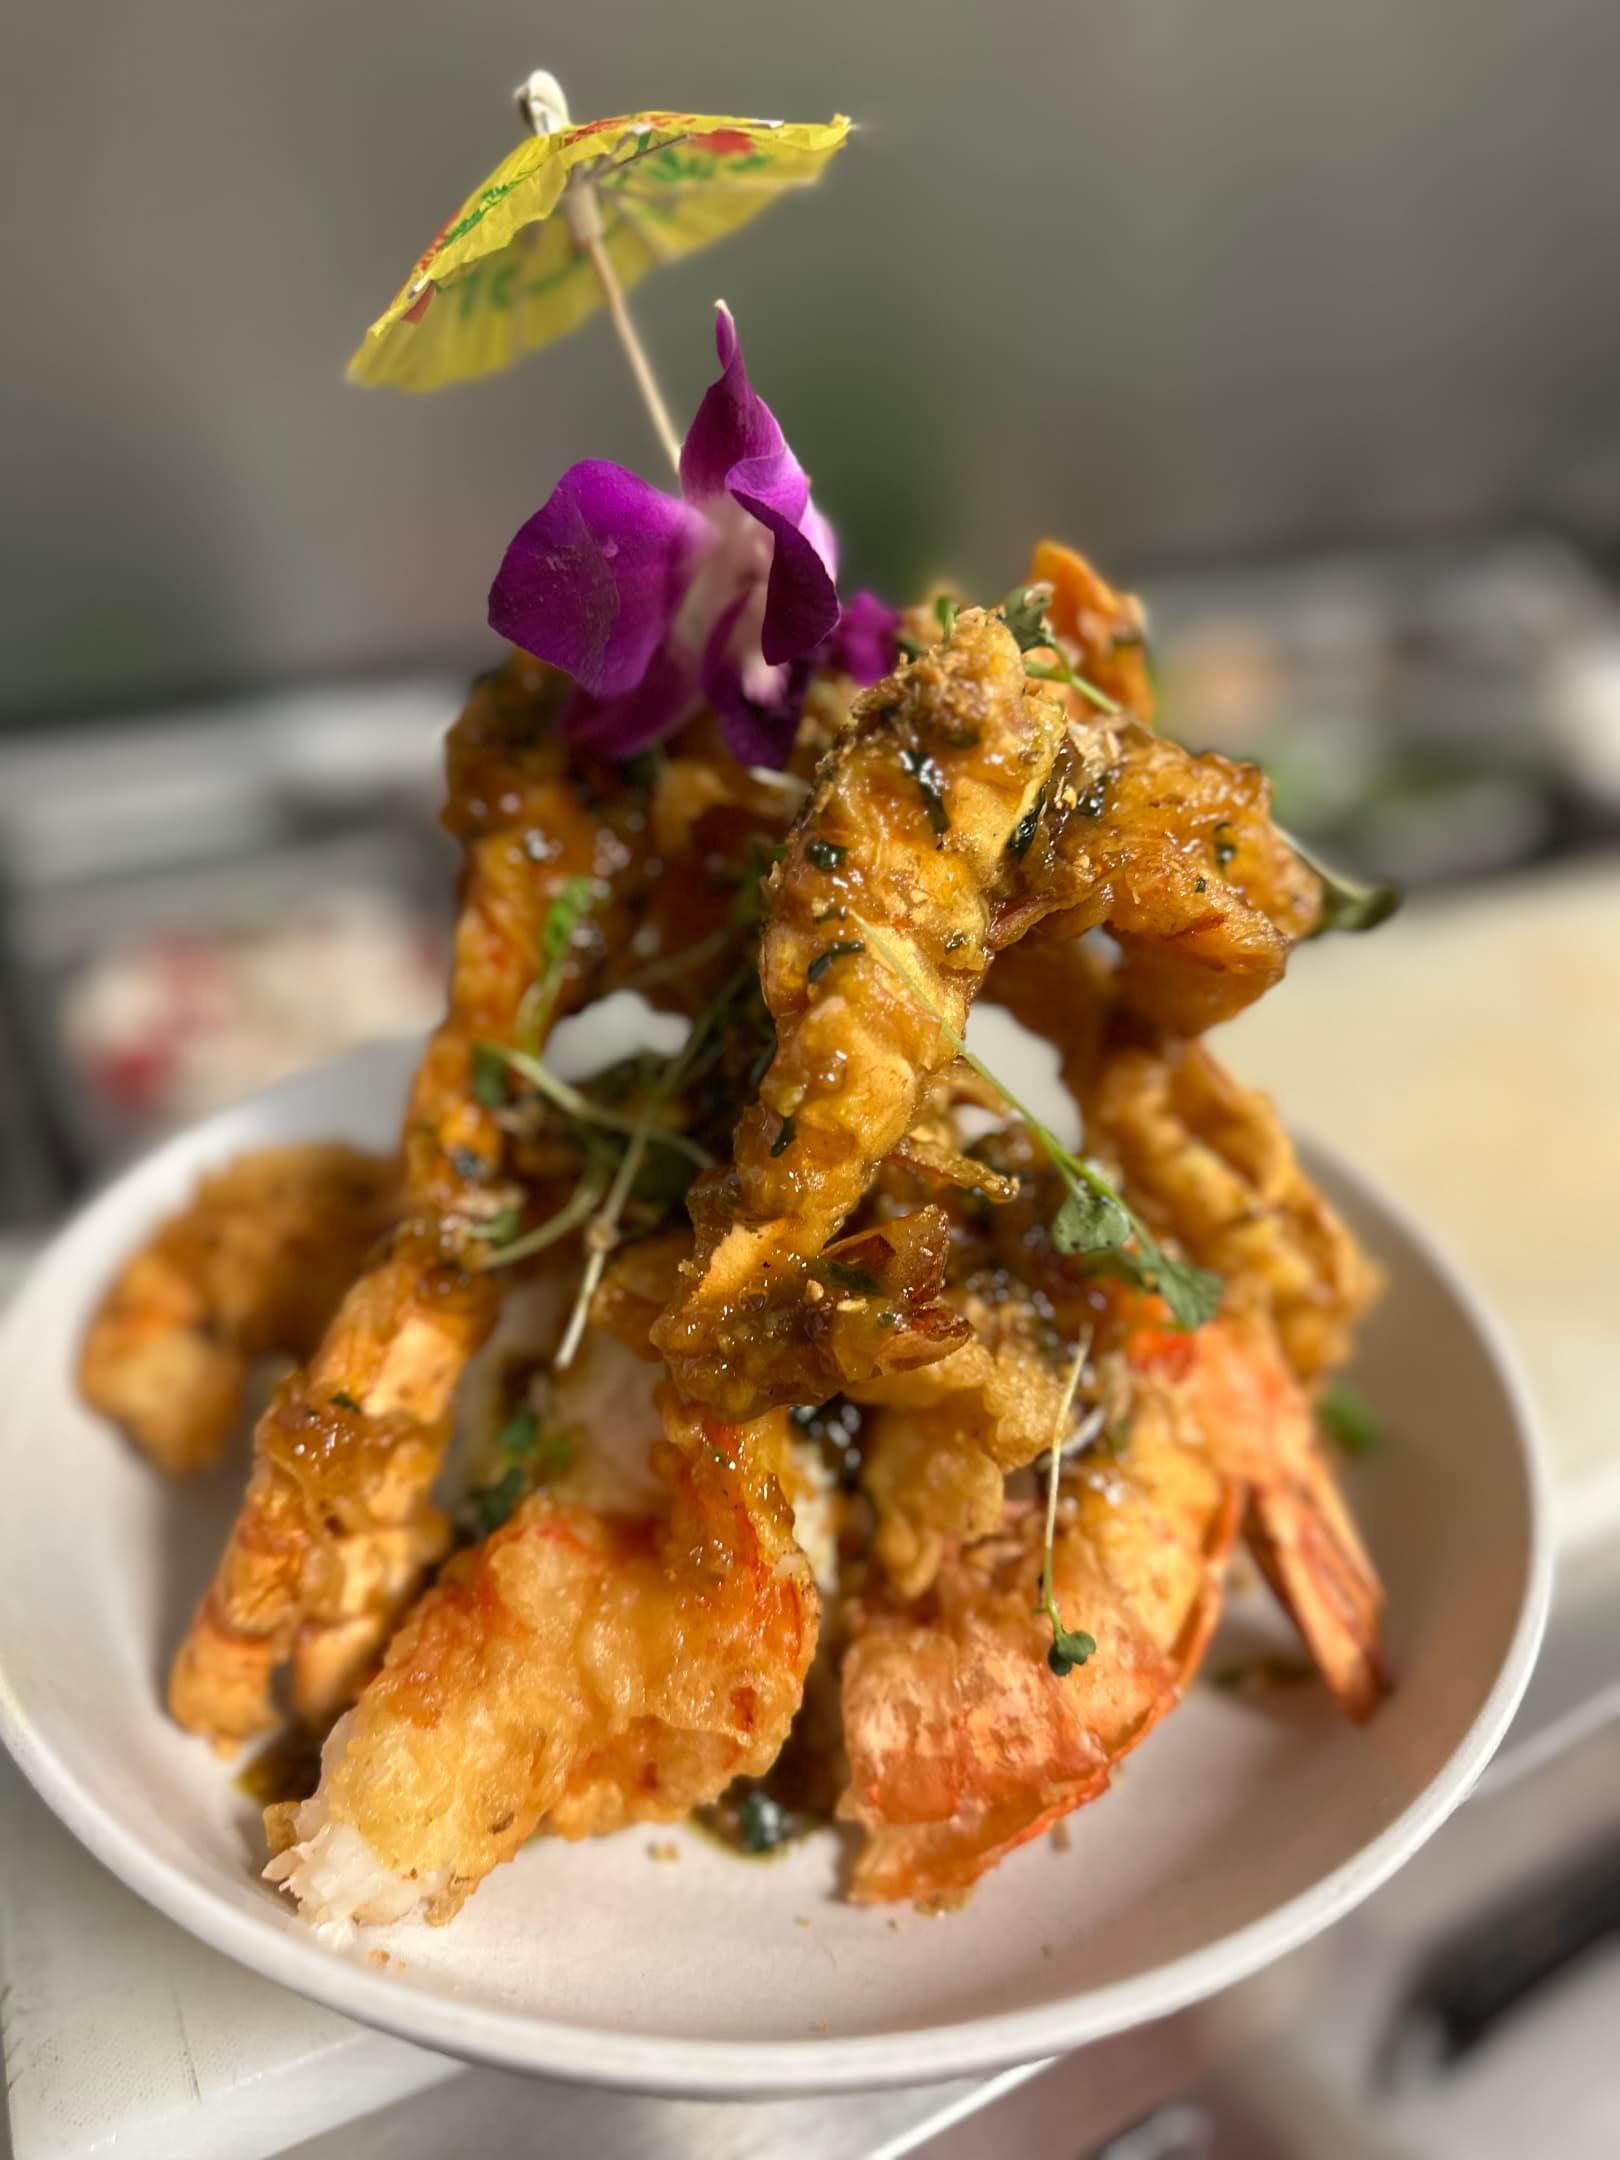 Come try our new Crispy Garlic Tiger Prawns on our new specials menu along with our Roasted Duck breast Fried Rice, and Grilled Lemongrass lamb chops 